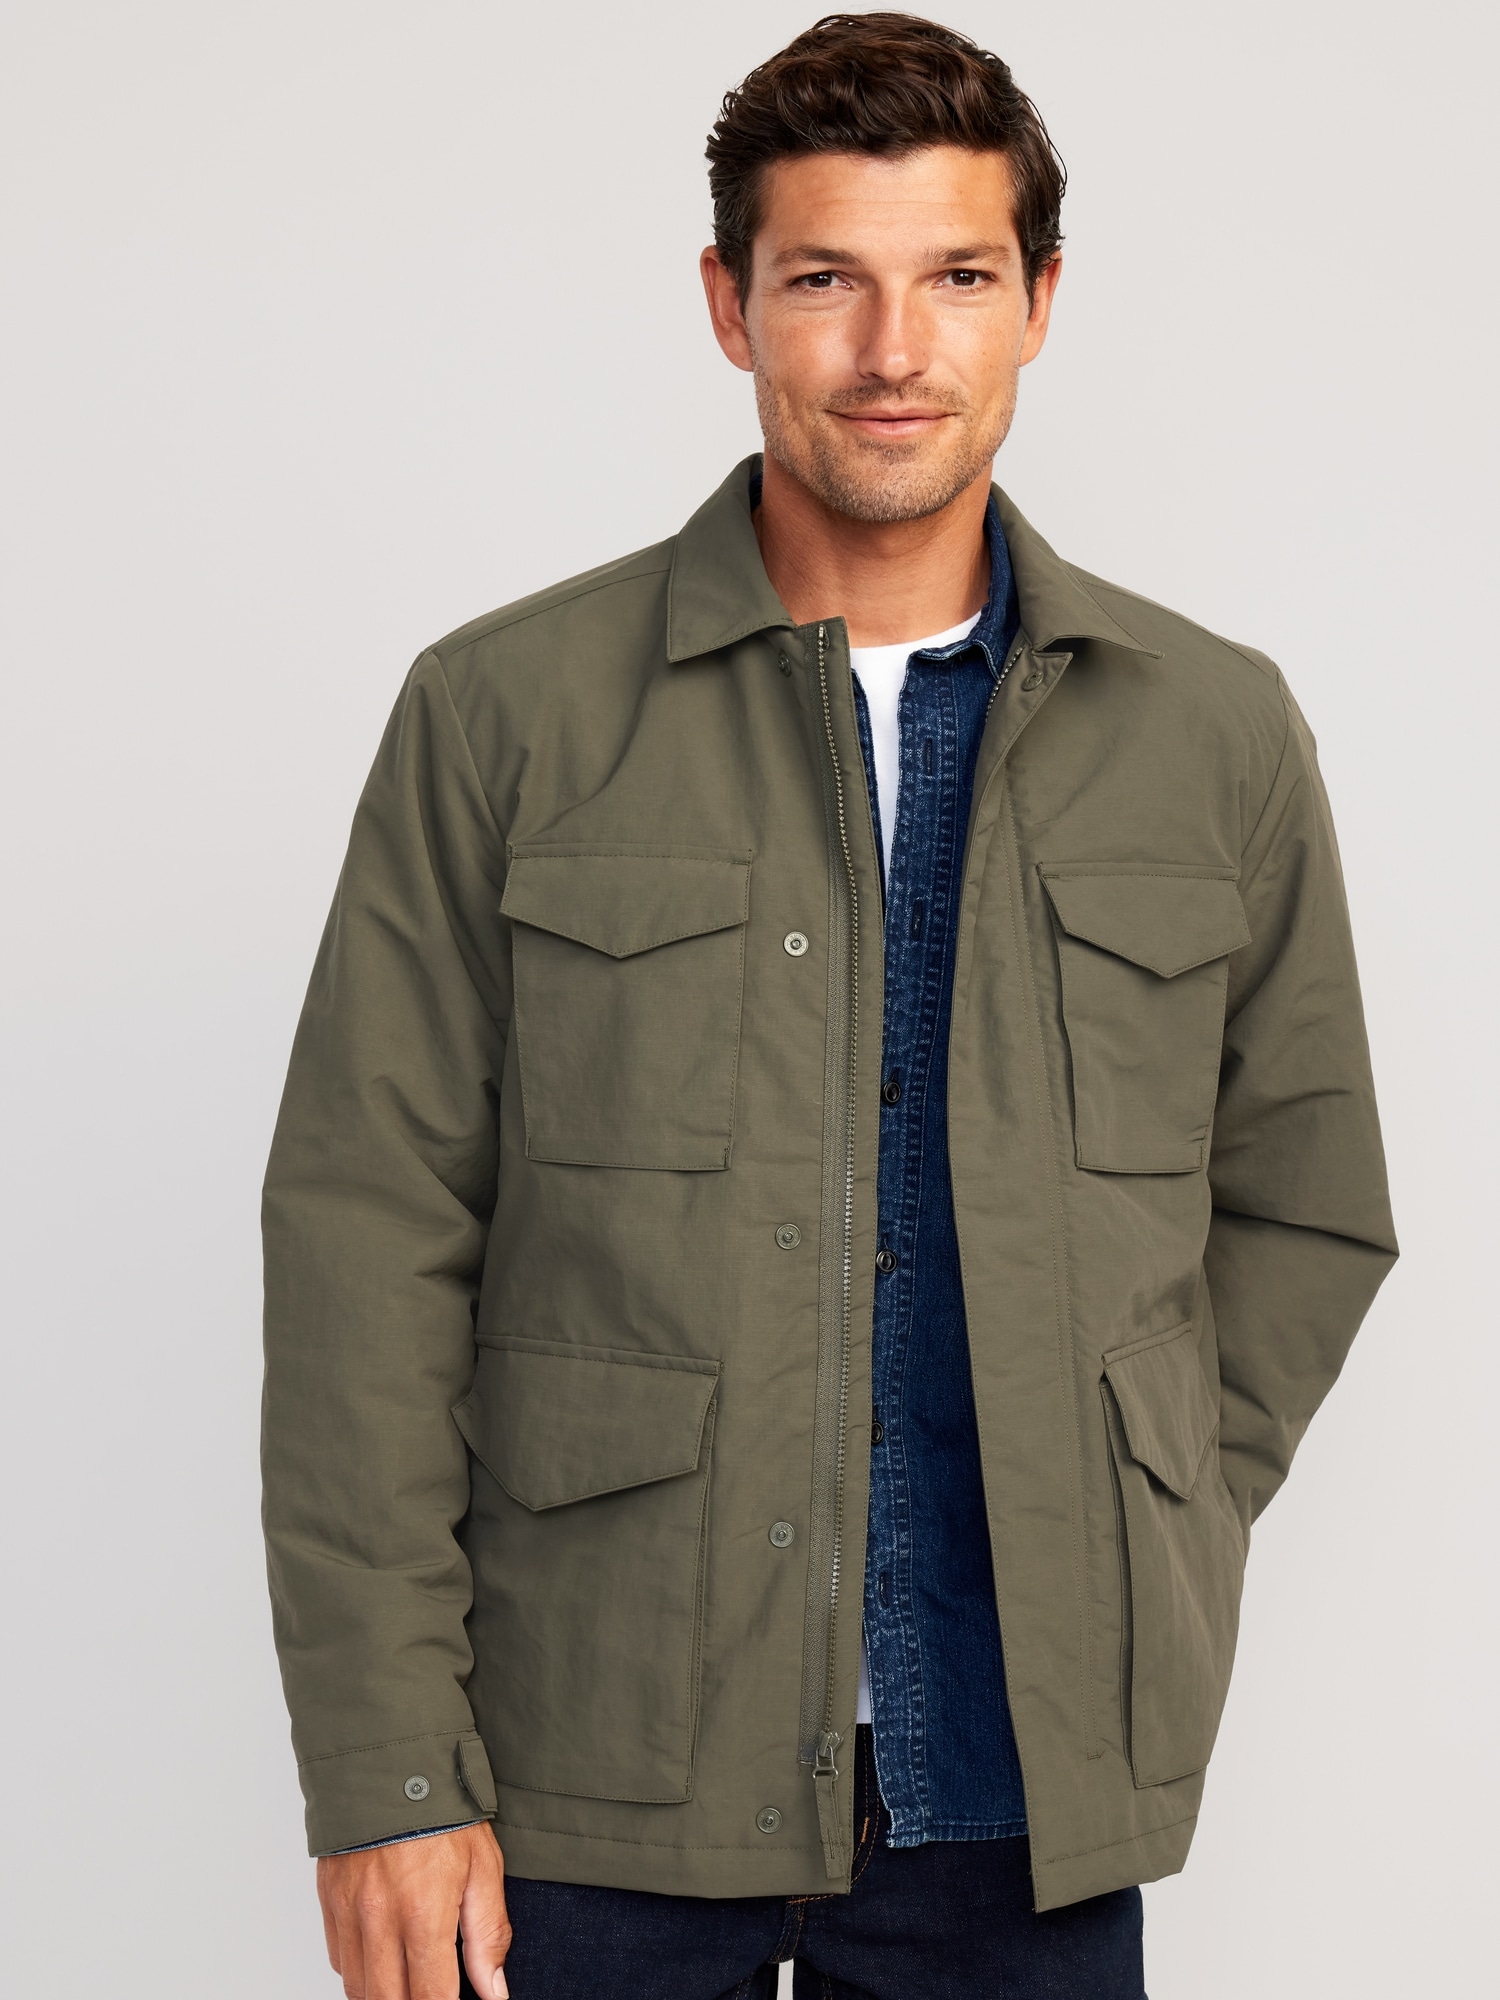 Tech Utility Jacket for Men | Old Navy